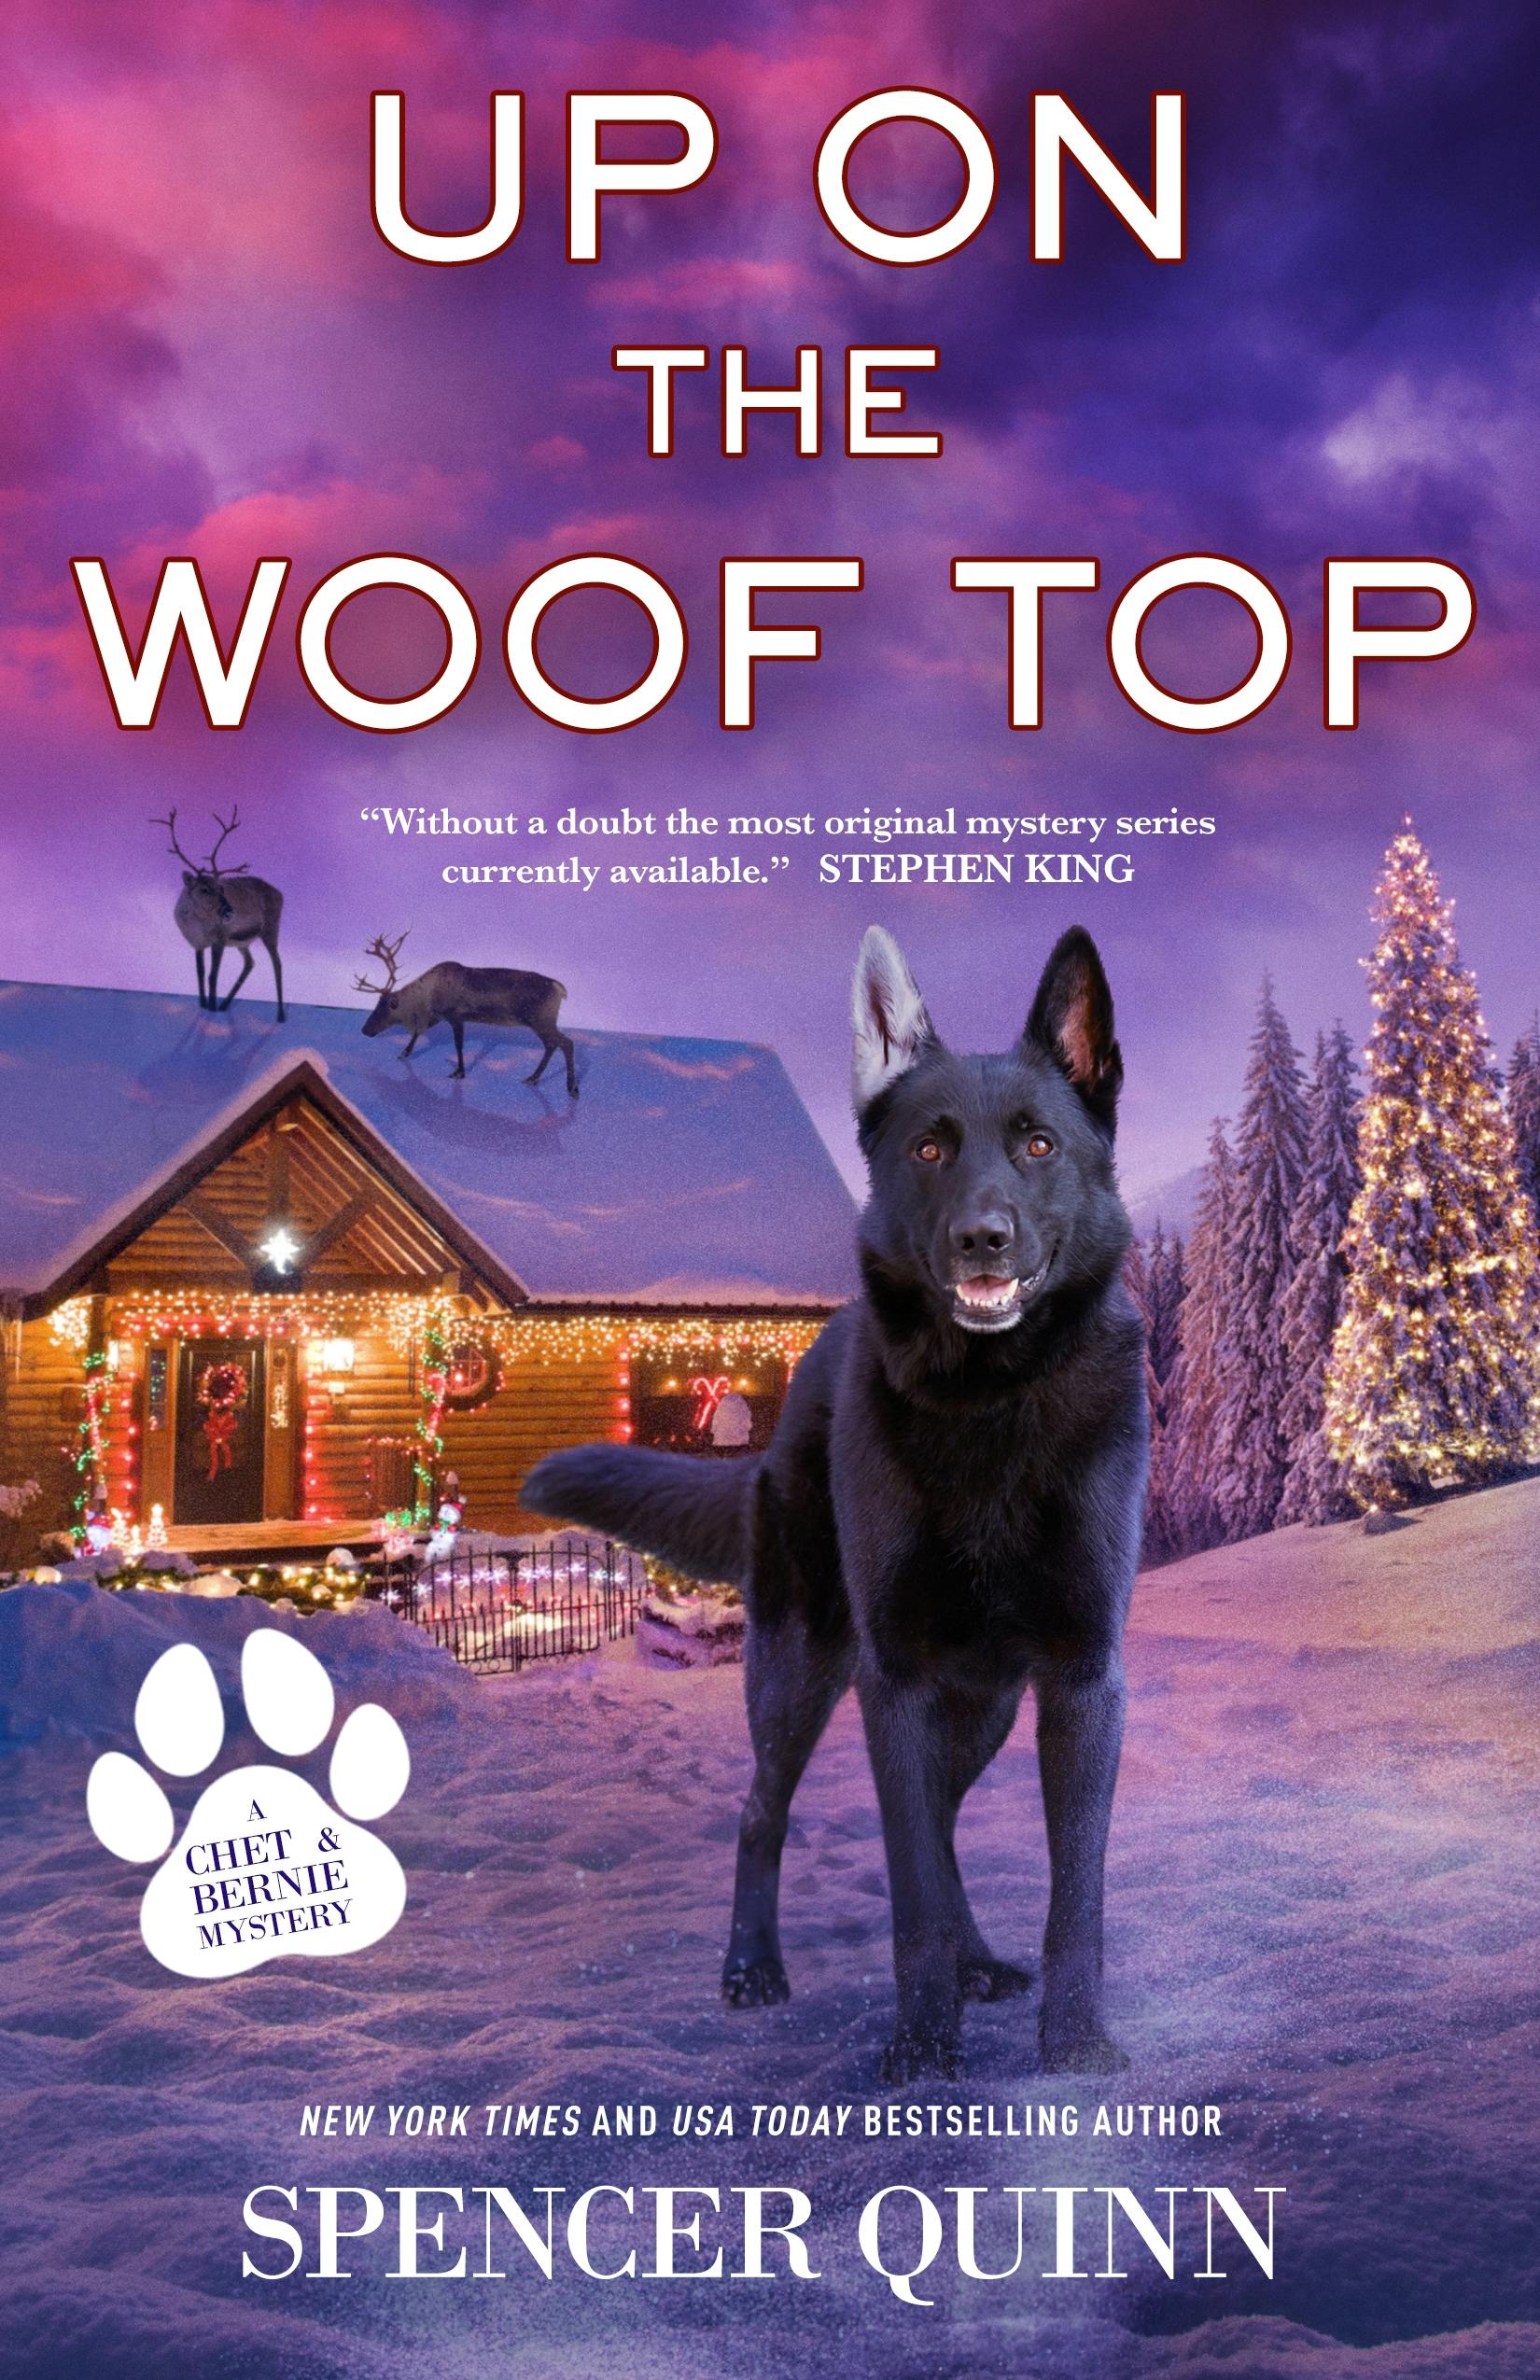 Cover for the book titled as: Up on the Woof Top